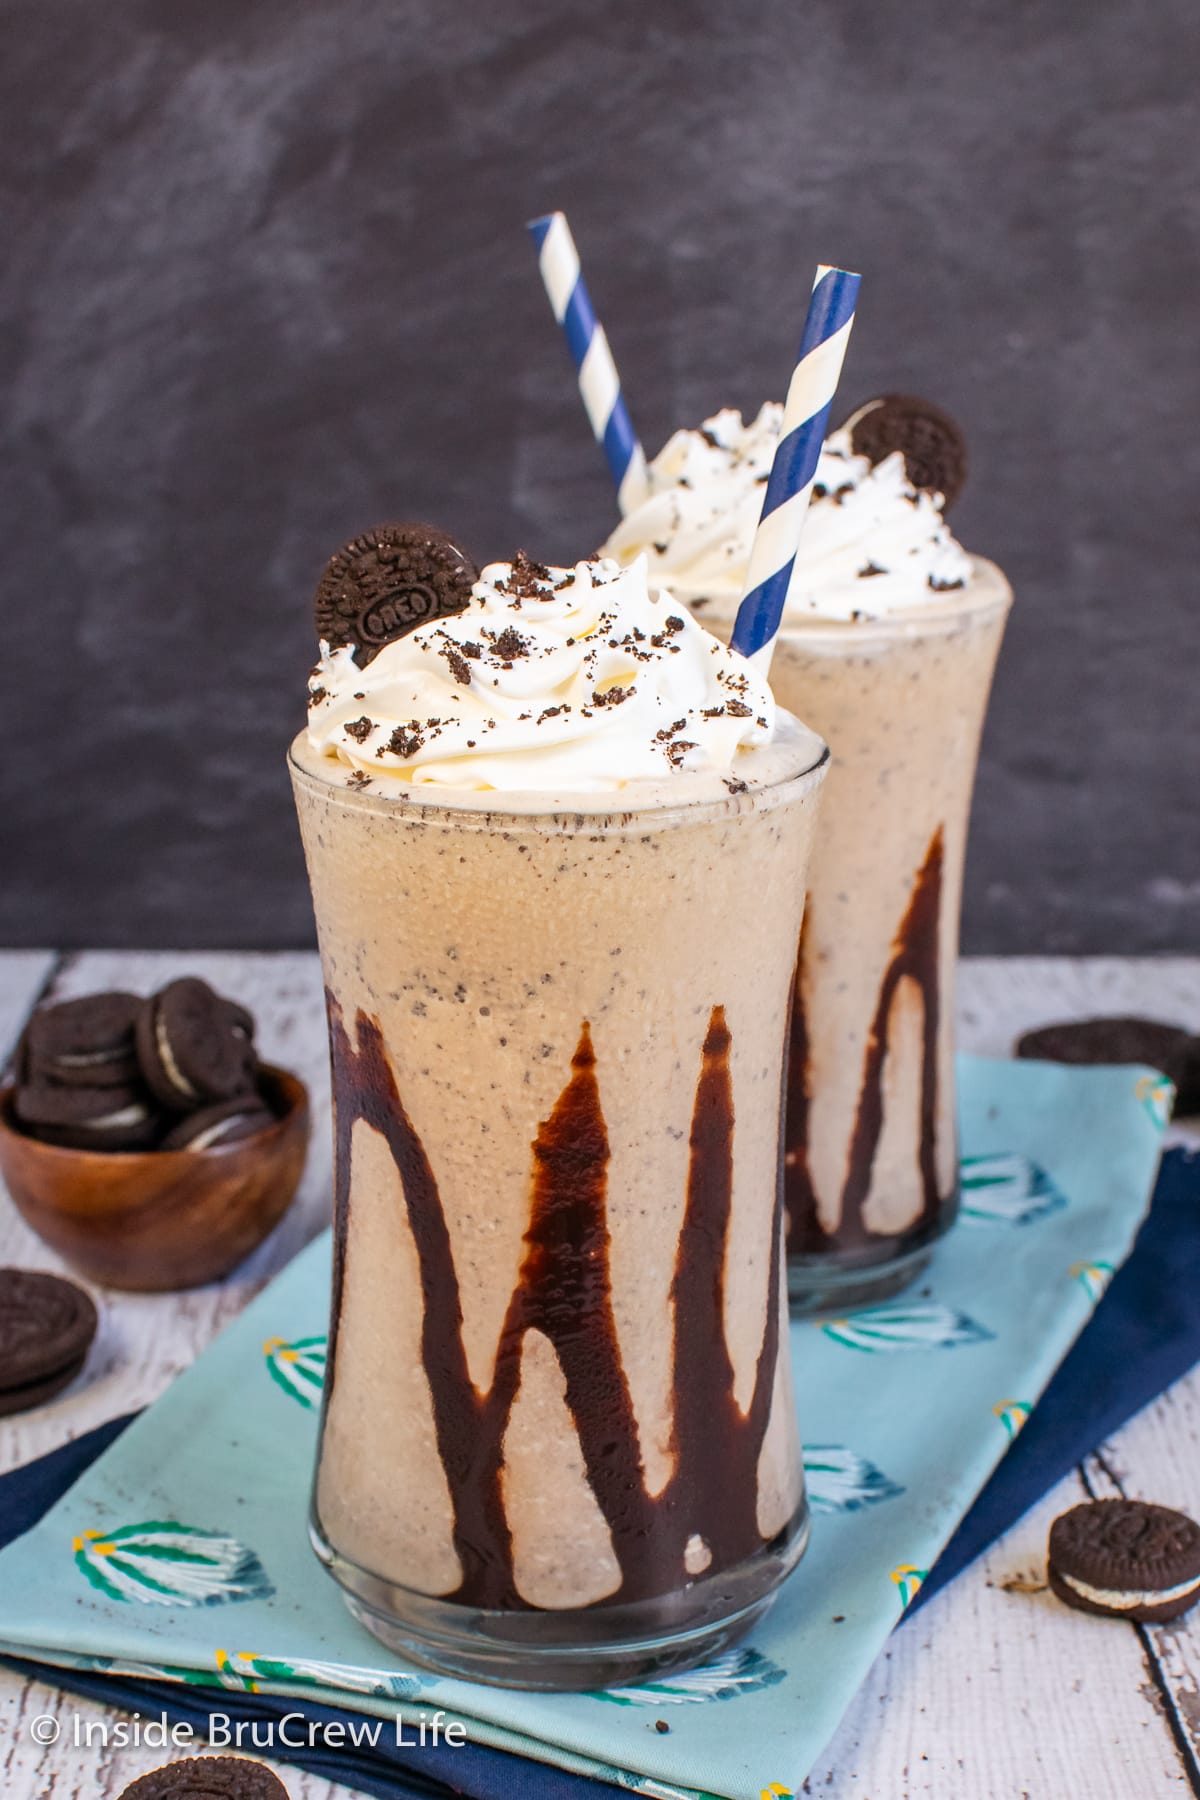 Two cups filled with an Oreo shake and drizzled with chocolate syrup.